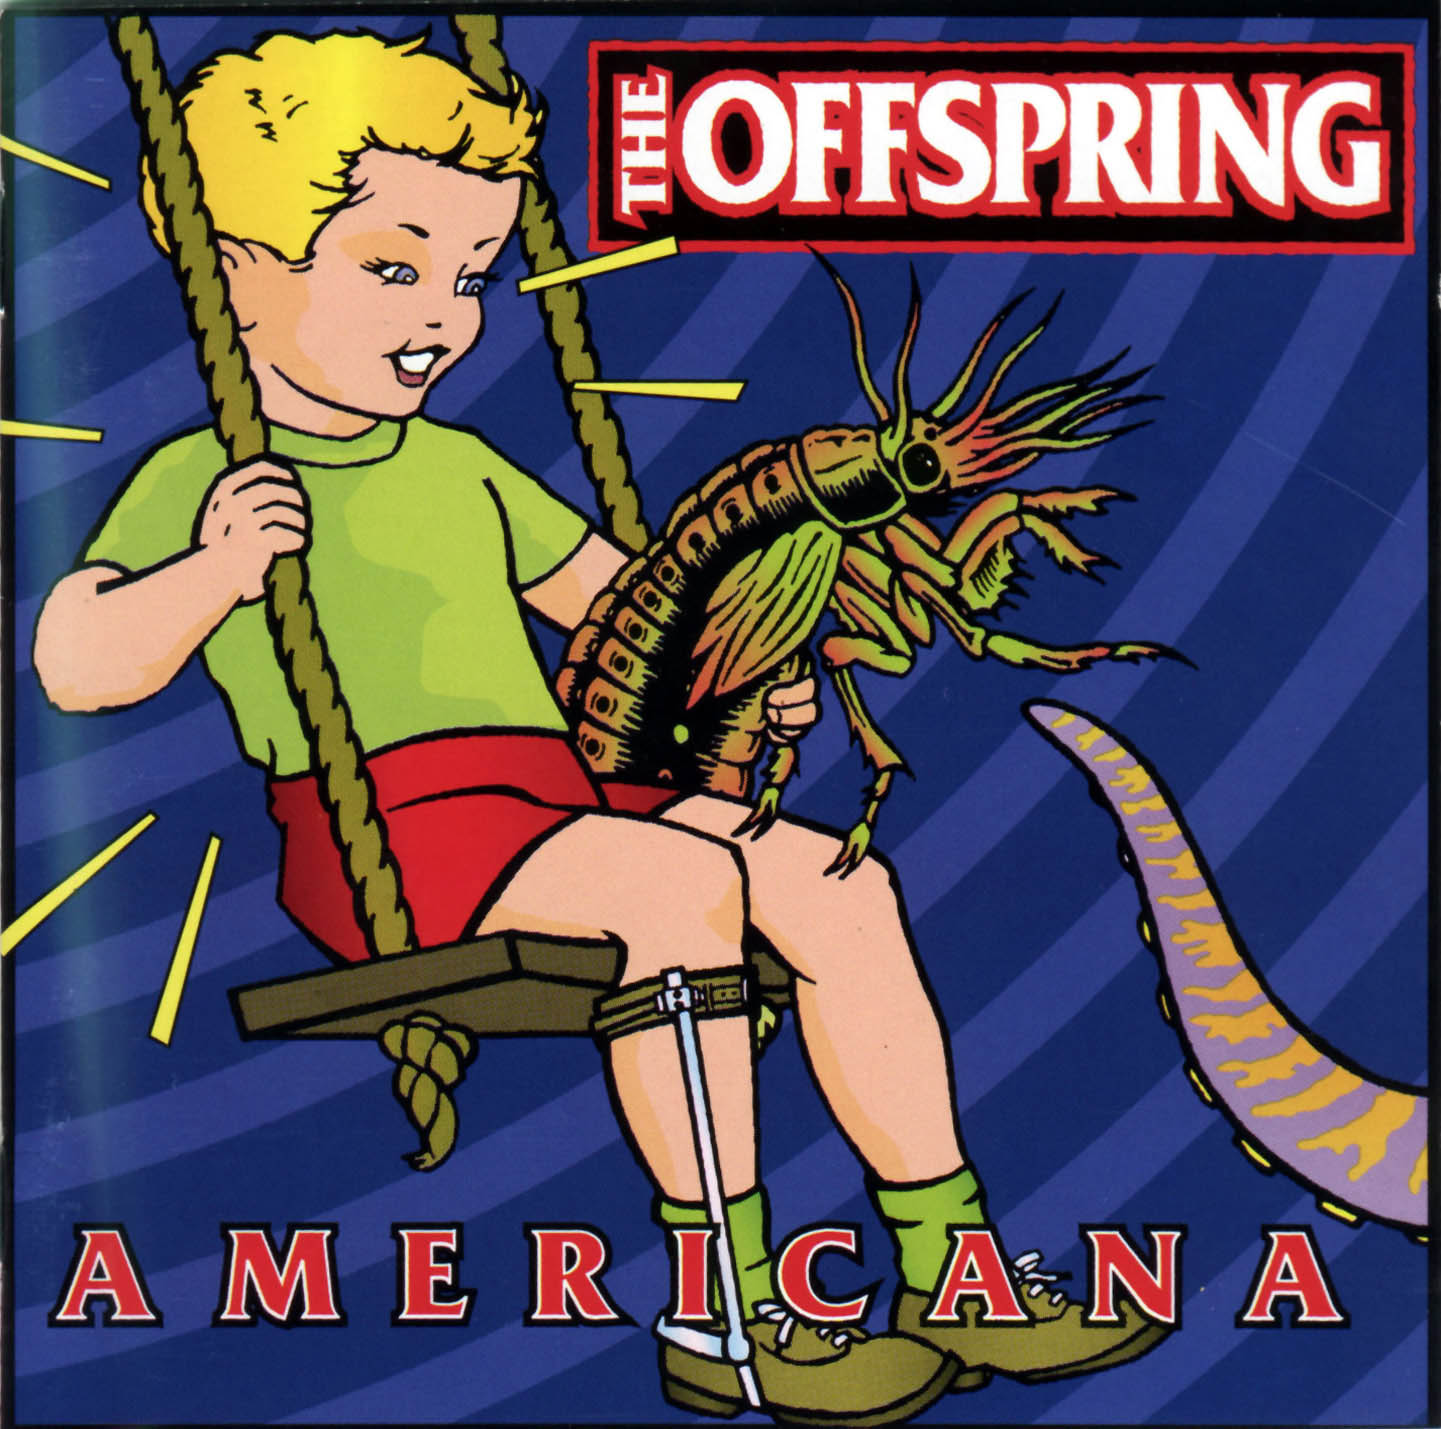 http://images.coveralia.com/audio/t/The_Offspring-Americana-Frontal.jpg